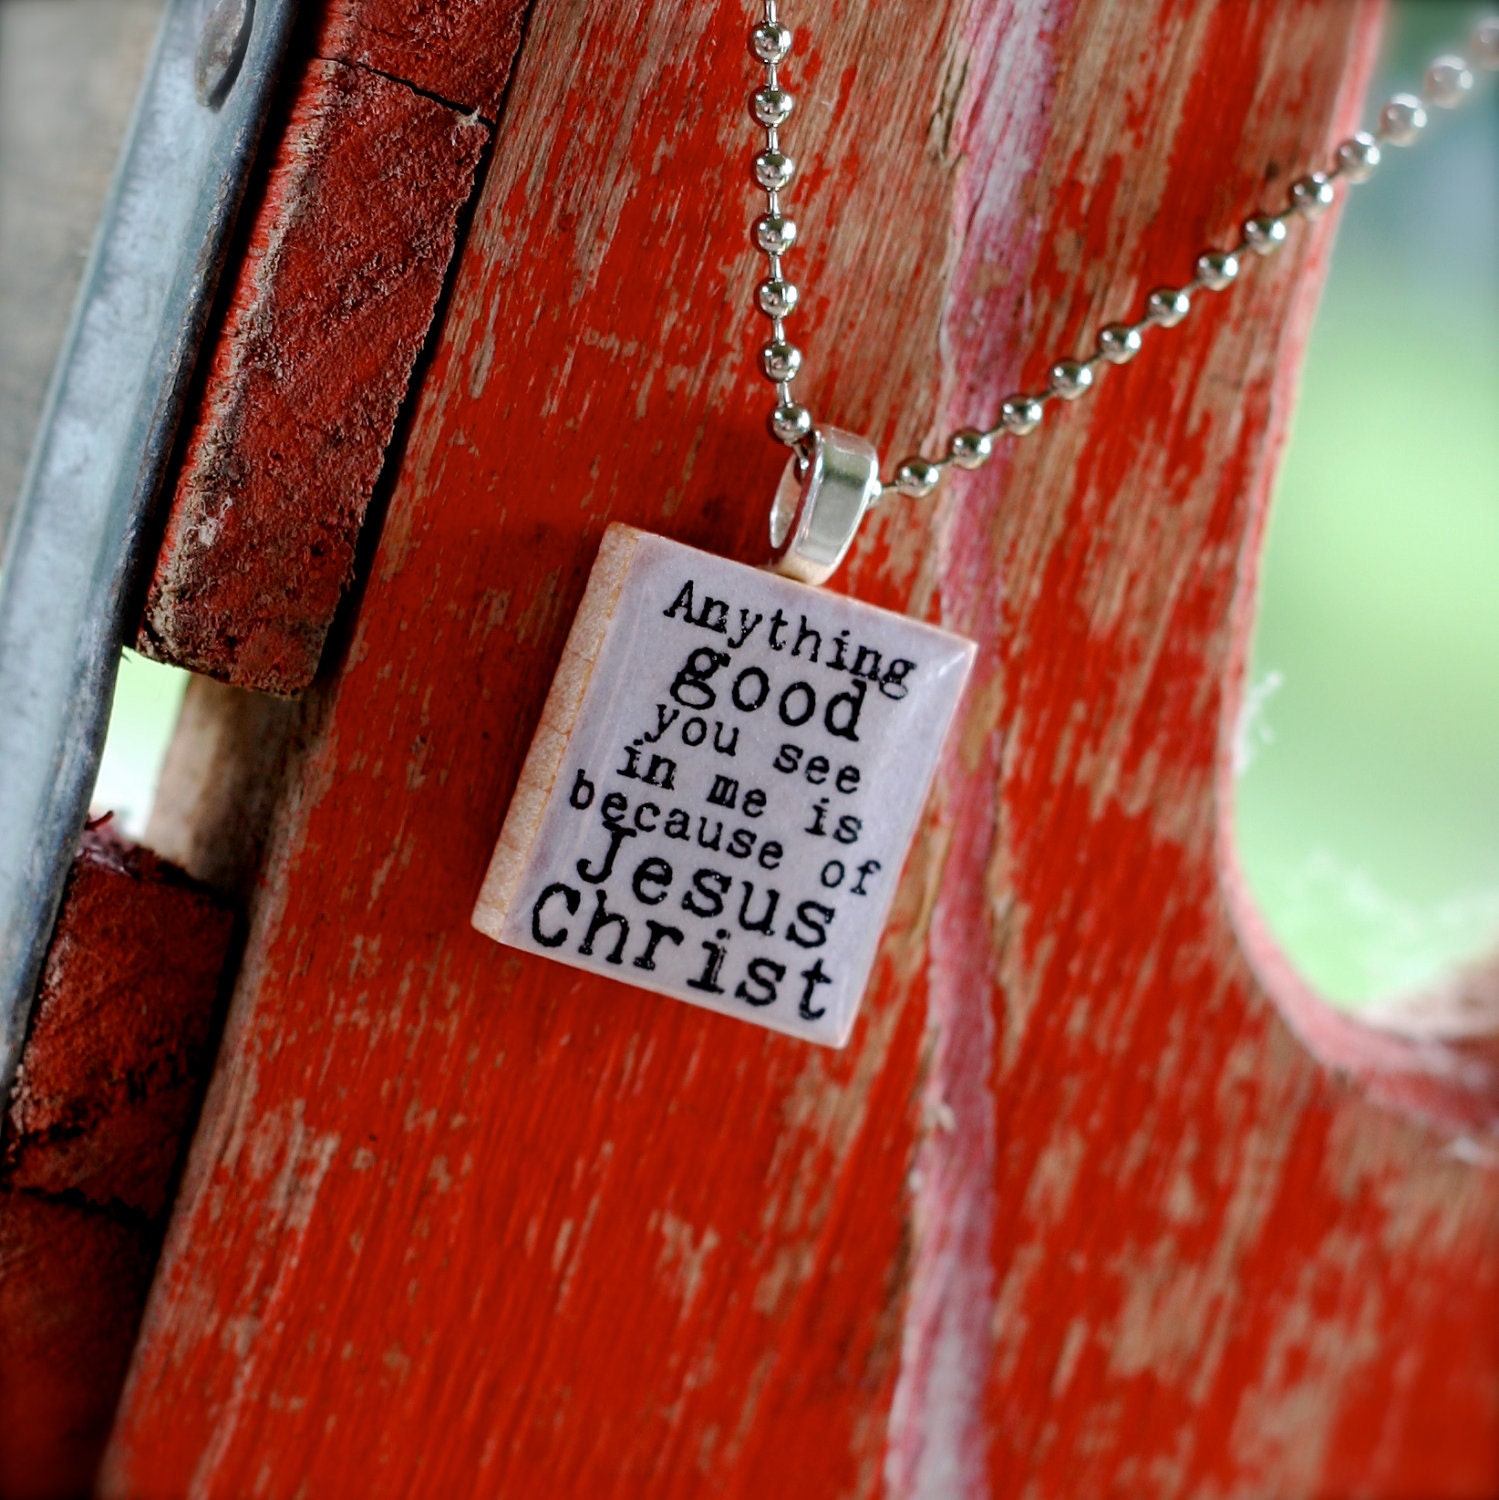 Anything GOOD you see in me is because of JESUS CHRIST Scrabble necklace